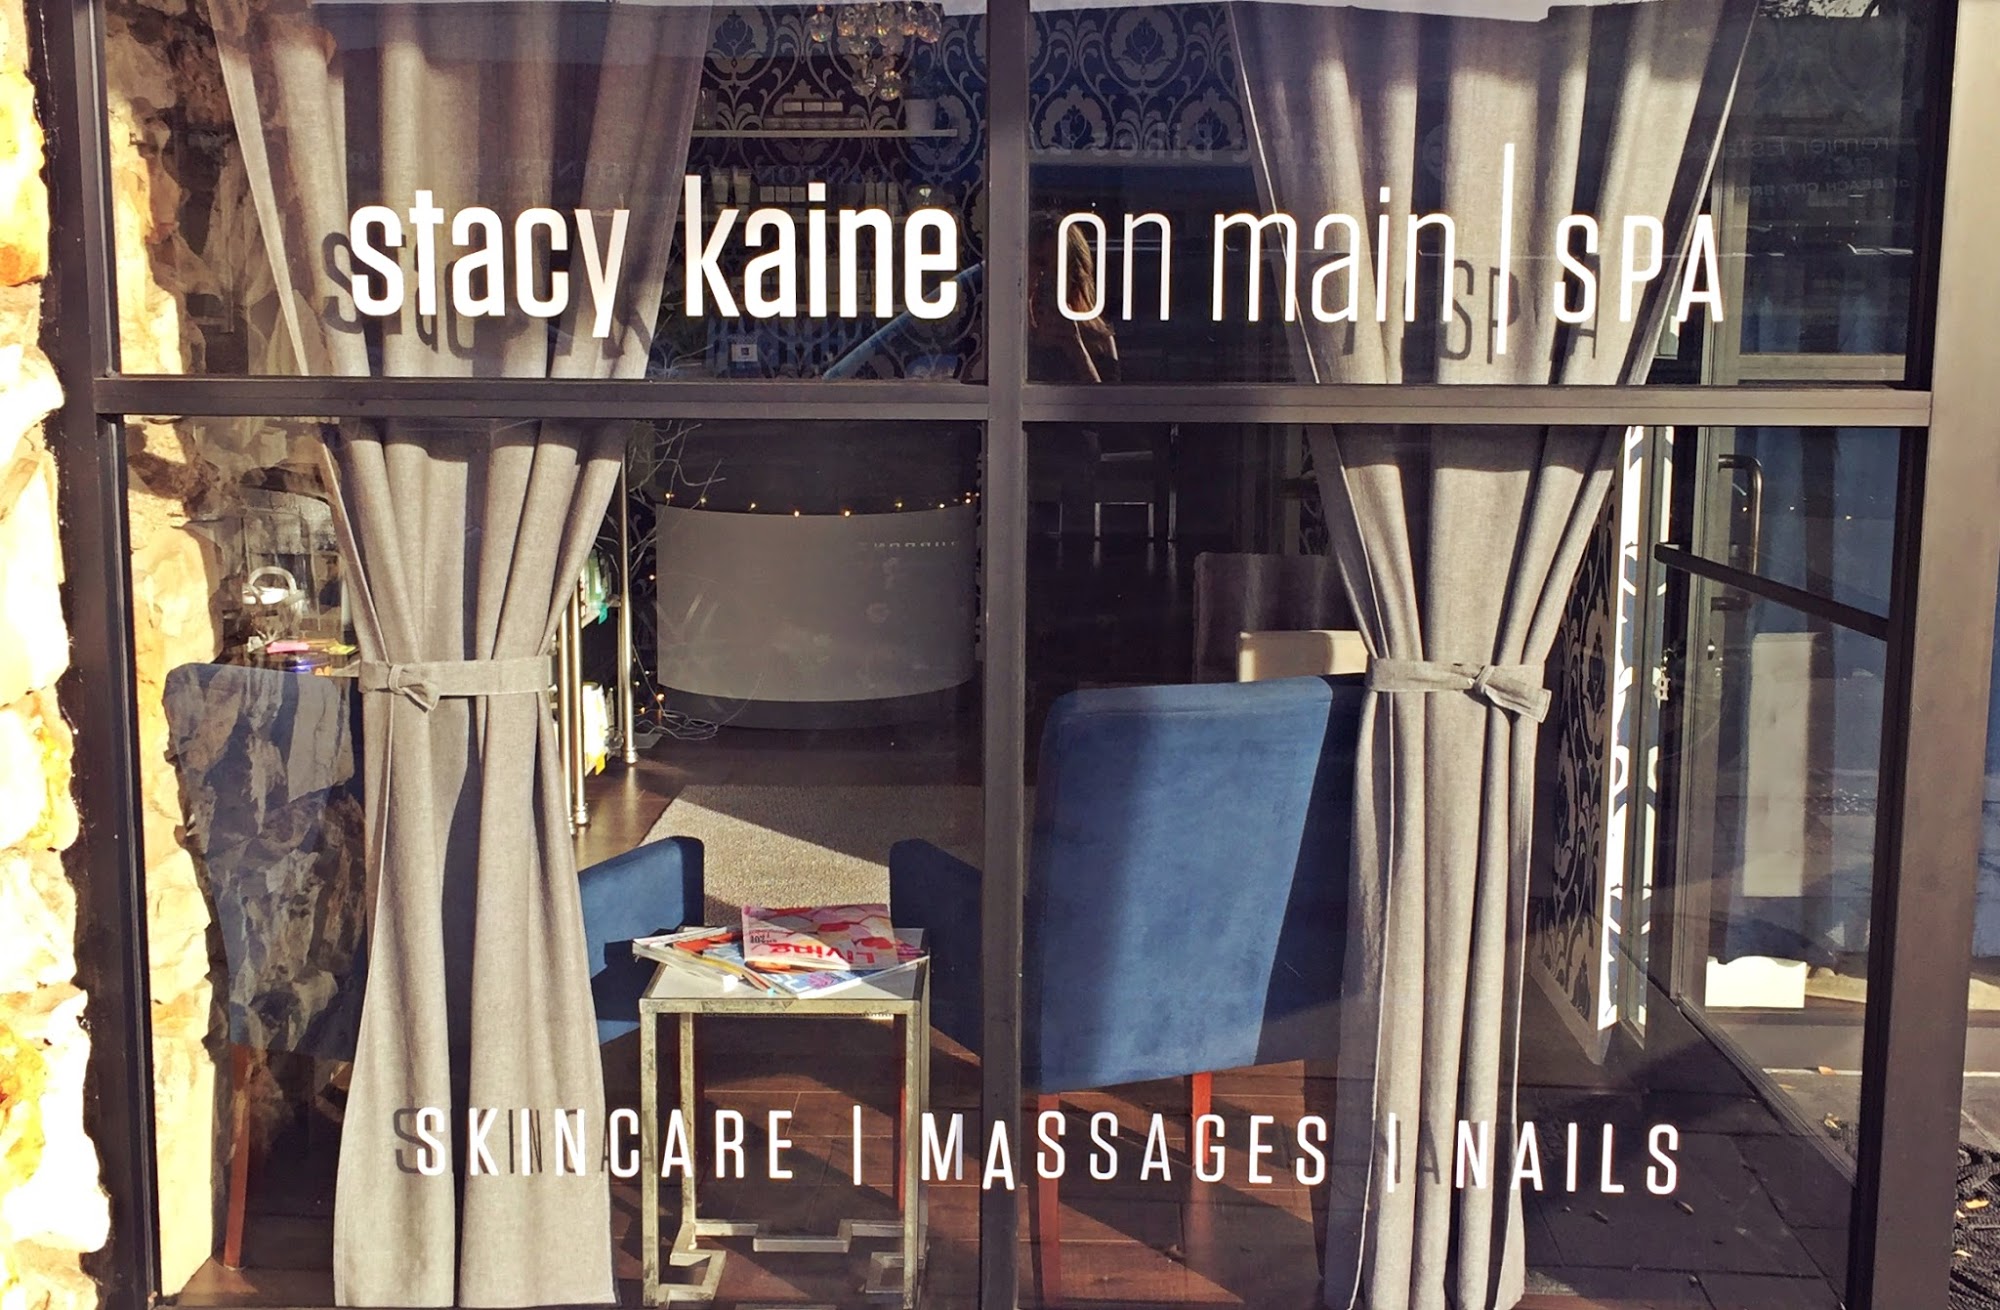 Stacy Kaine on Main- Advanced Luxury Skincare Facials, Ageless Anti-Aging Hydro Facial, Acne Treatment, Fire & Ice Facial